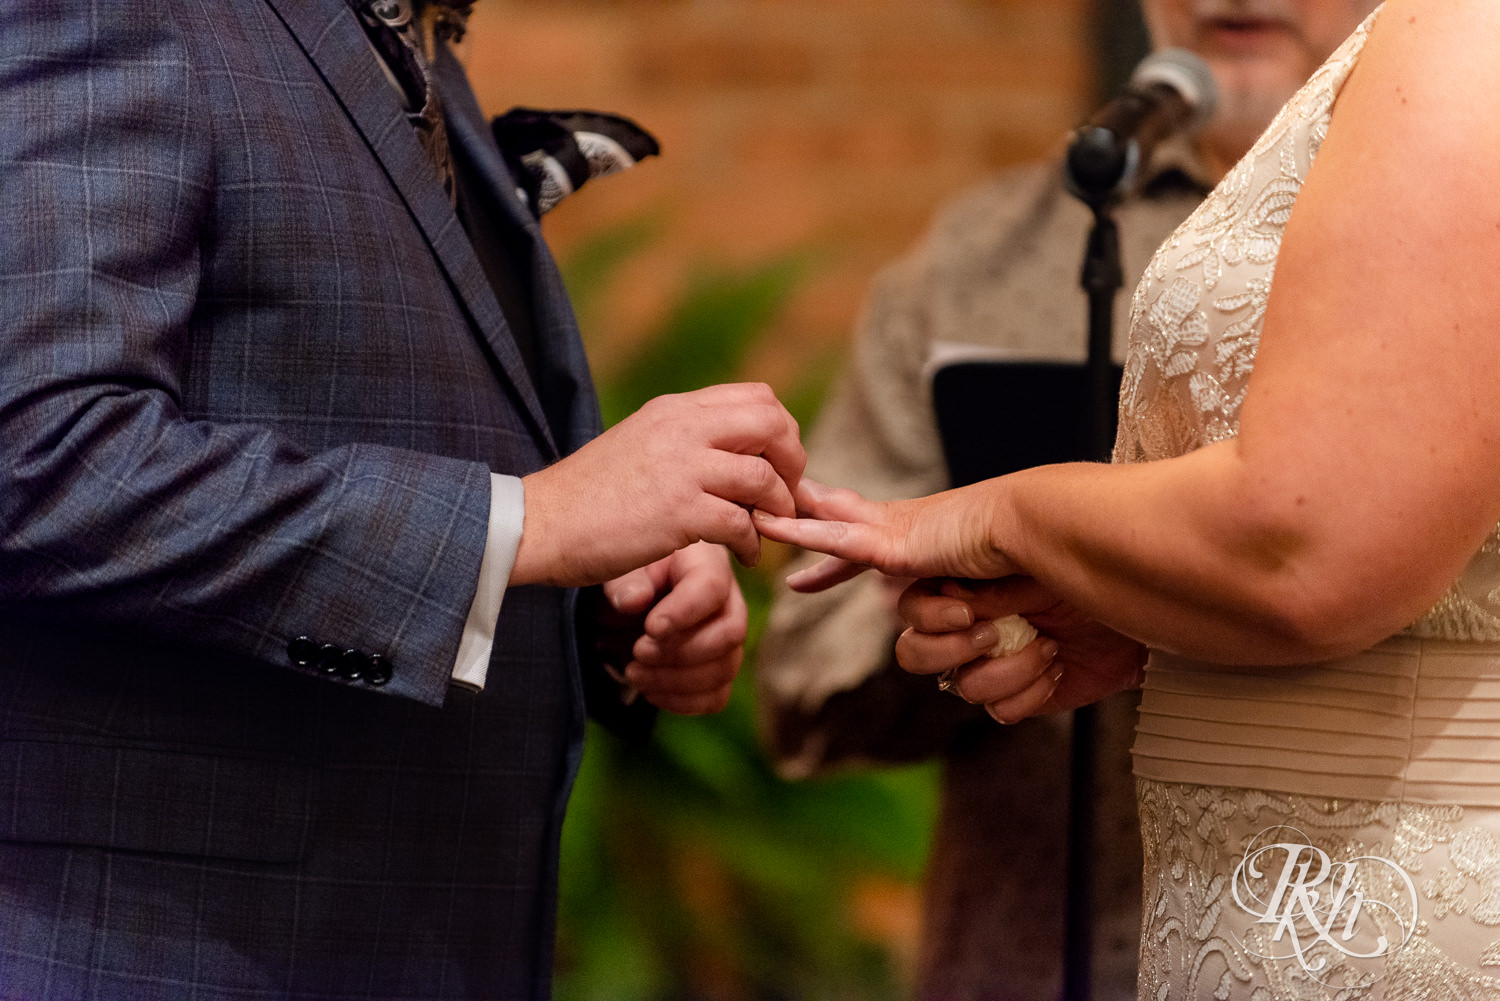 Bride and groom exchange rings during wedding ceremony at Nicollet Island Pavilion in Minneapolis, Minnesota.